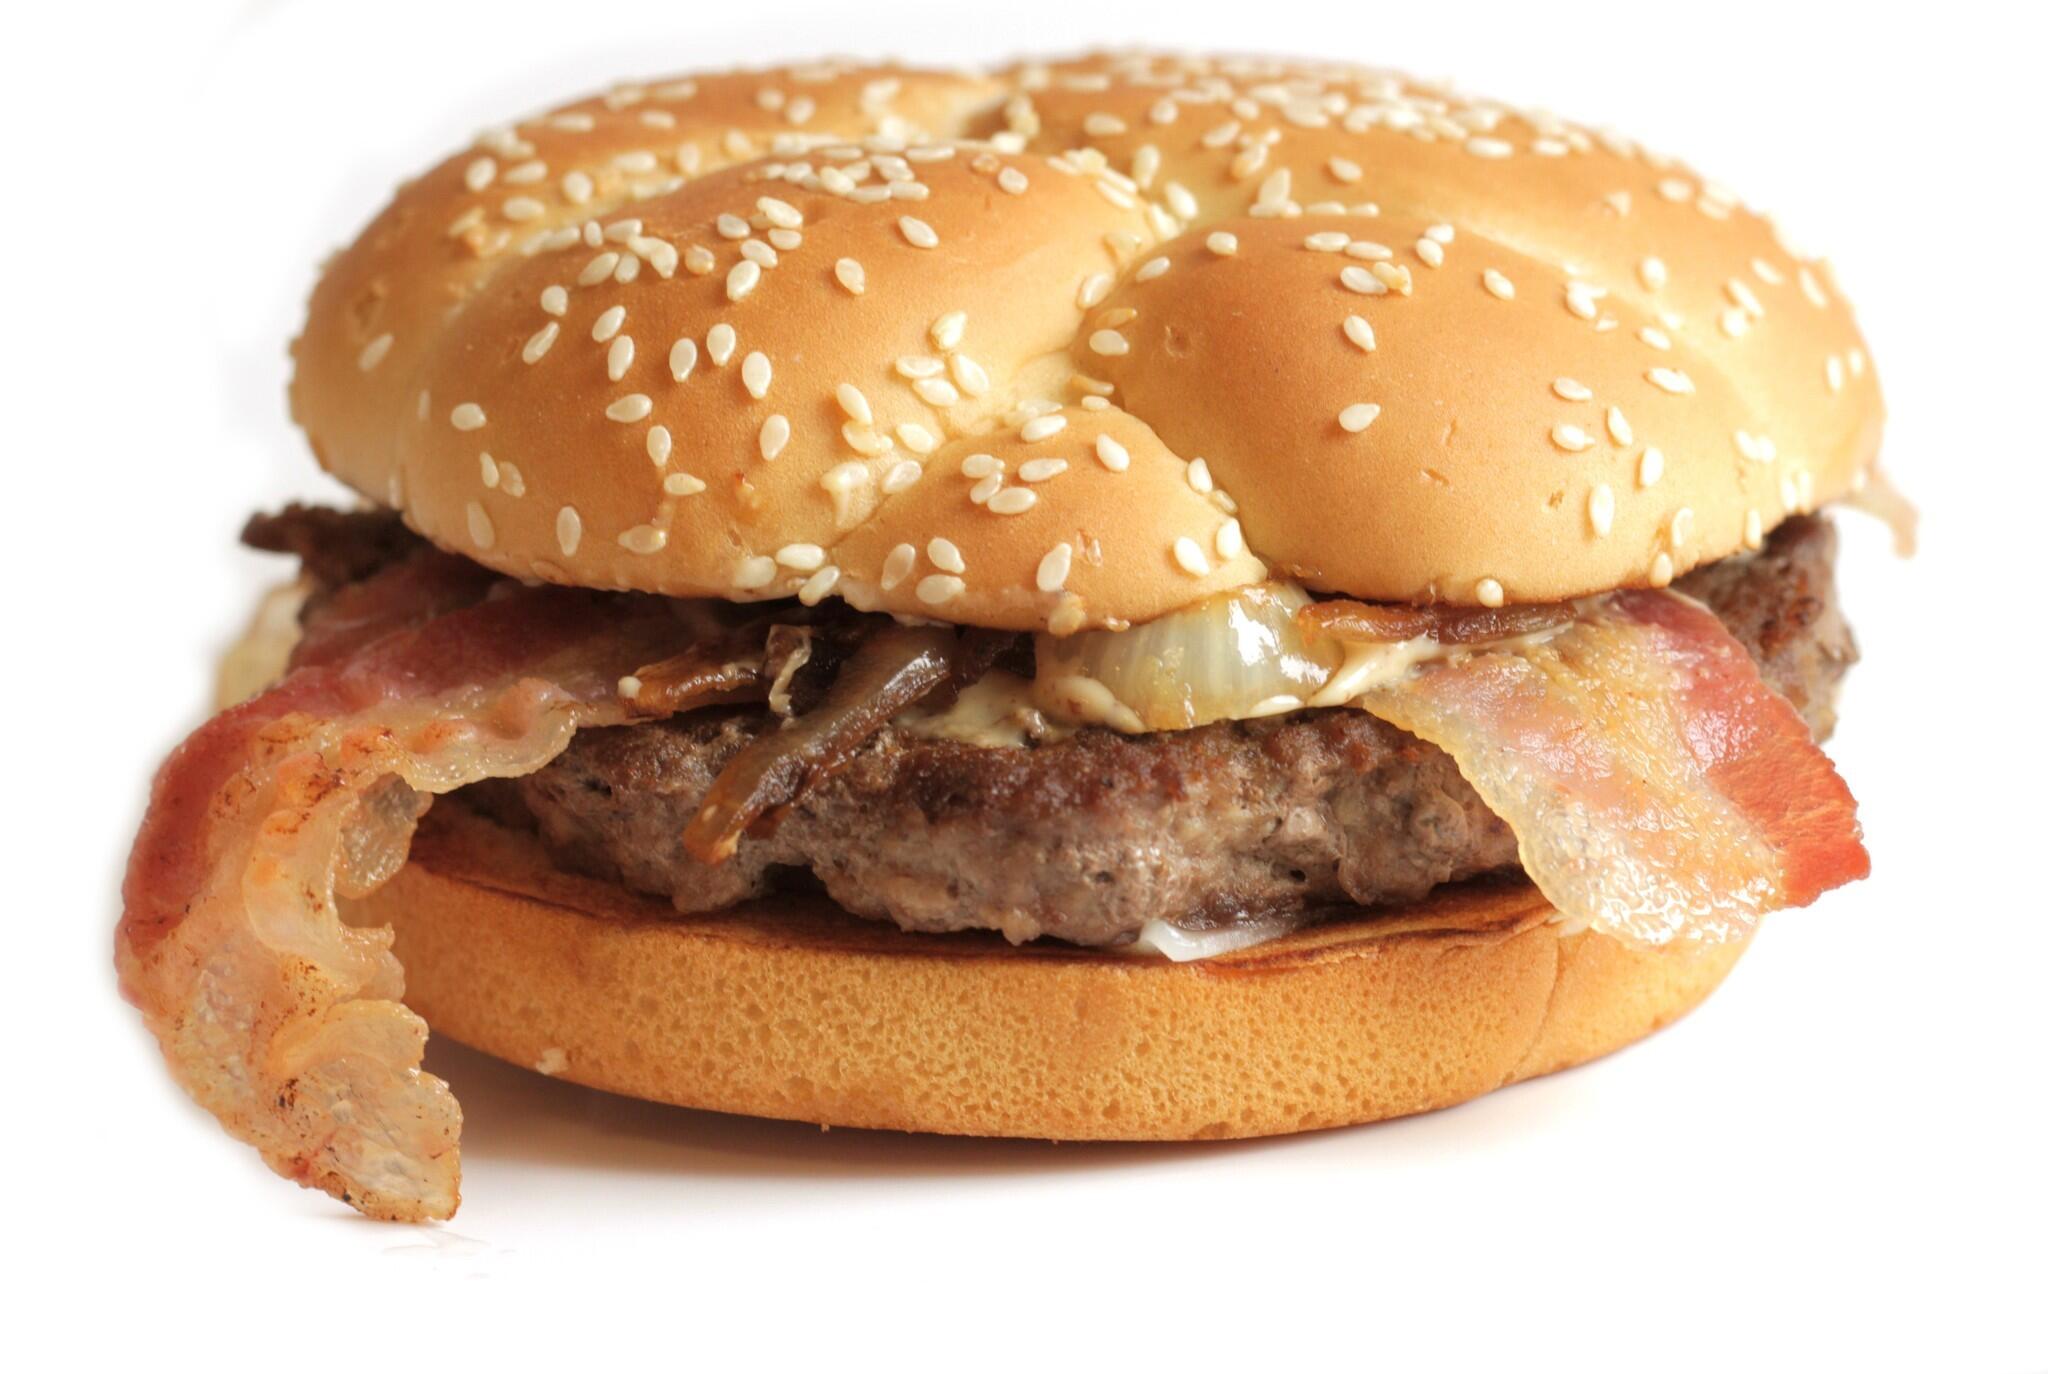 The Angus Third-Pounder debuted in 2009 and was discontinued in 2013. It came back for a limited time in 2015. Here the CBO (Cheddar Bacon Onion) burger is shown.